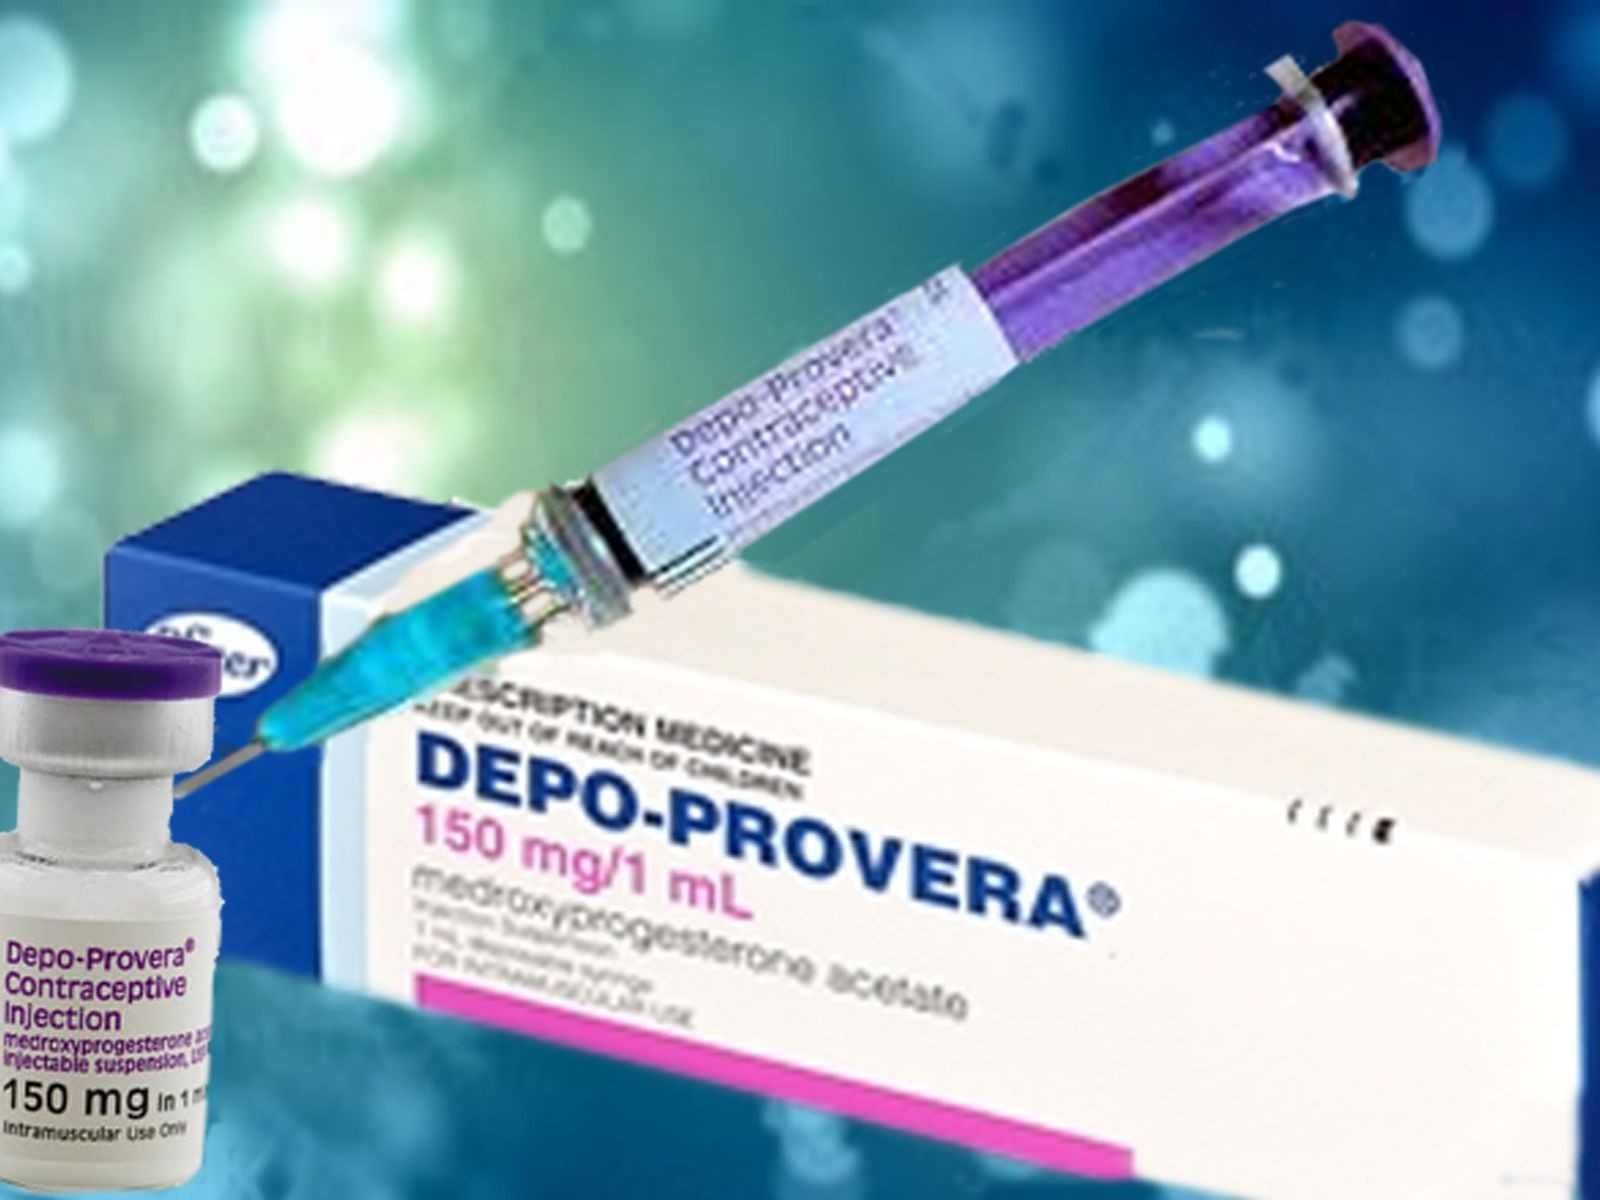 Advantages And Disadvantages Of Depo-Provera  Depo Provera Schedule 15 Week 2020